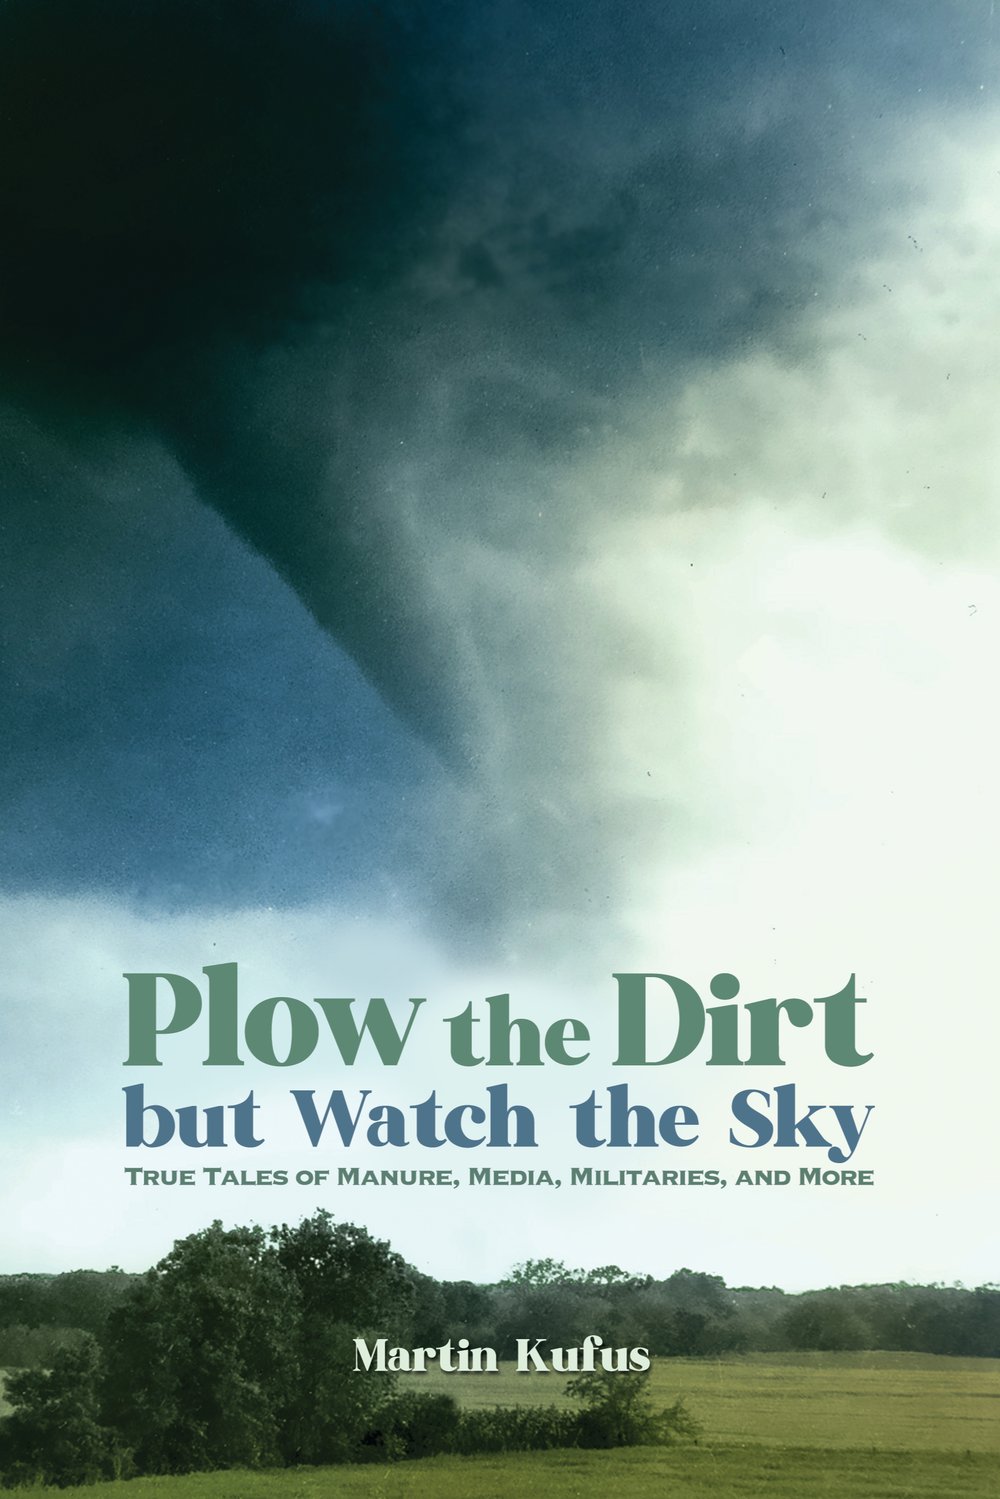 Book cover for "Plow the Dirt but Watch the Sky: True Tales of Manure, Media, Militaries, and More."